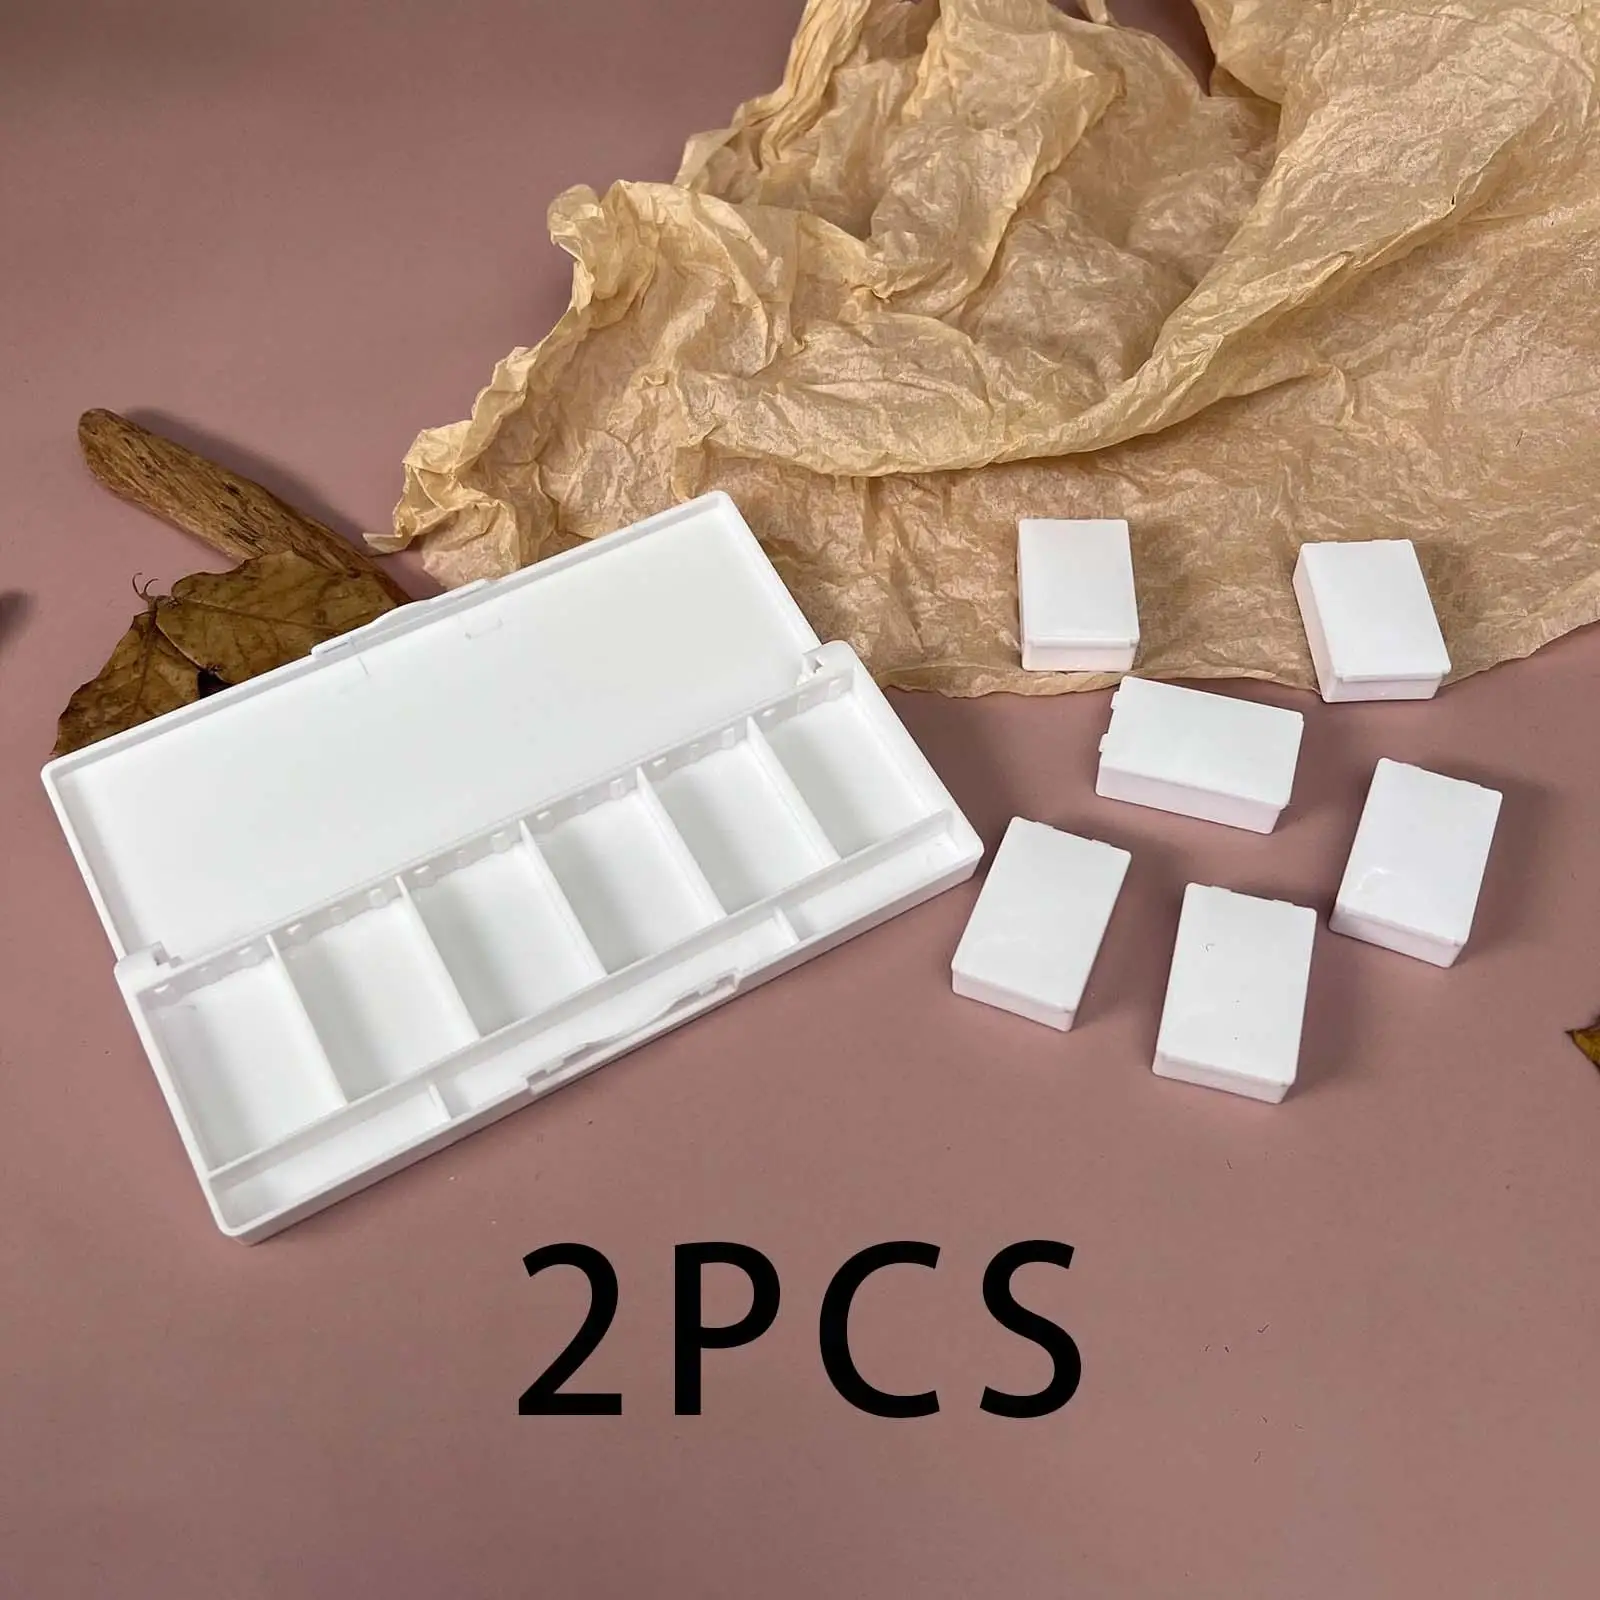 2 Pieces Empty Refillable Container DIY Travel Size Reusable Case Split Sample Empty Box for Eyeshadow Concealer Beauty Cosmetic